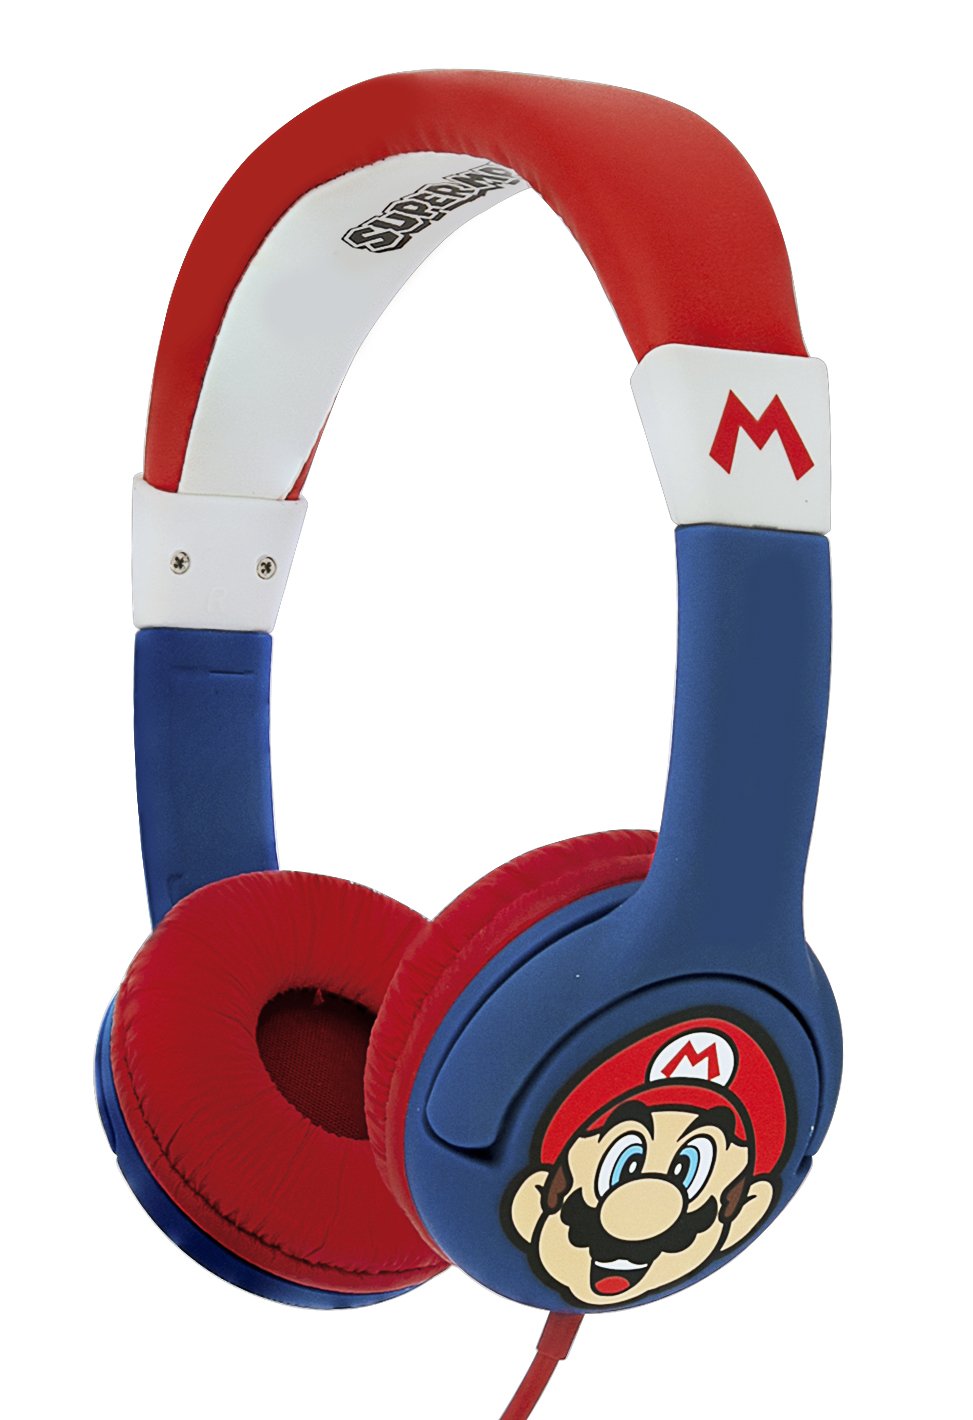 OTL SuperMario OnEar Wired Headphone - Safe Volume Limiting @85dB, Foldable & Adjustable, Superb Sound Quality,  Works w/ Smartphones, Tablets, Ninetendo Switch, Laptops & devices w/ 3.5mm port - Mario